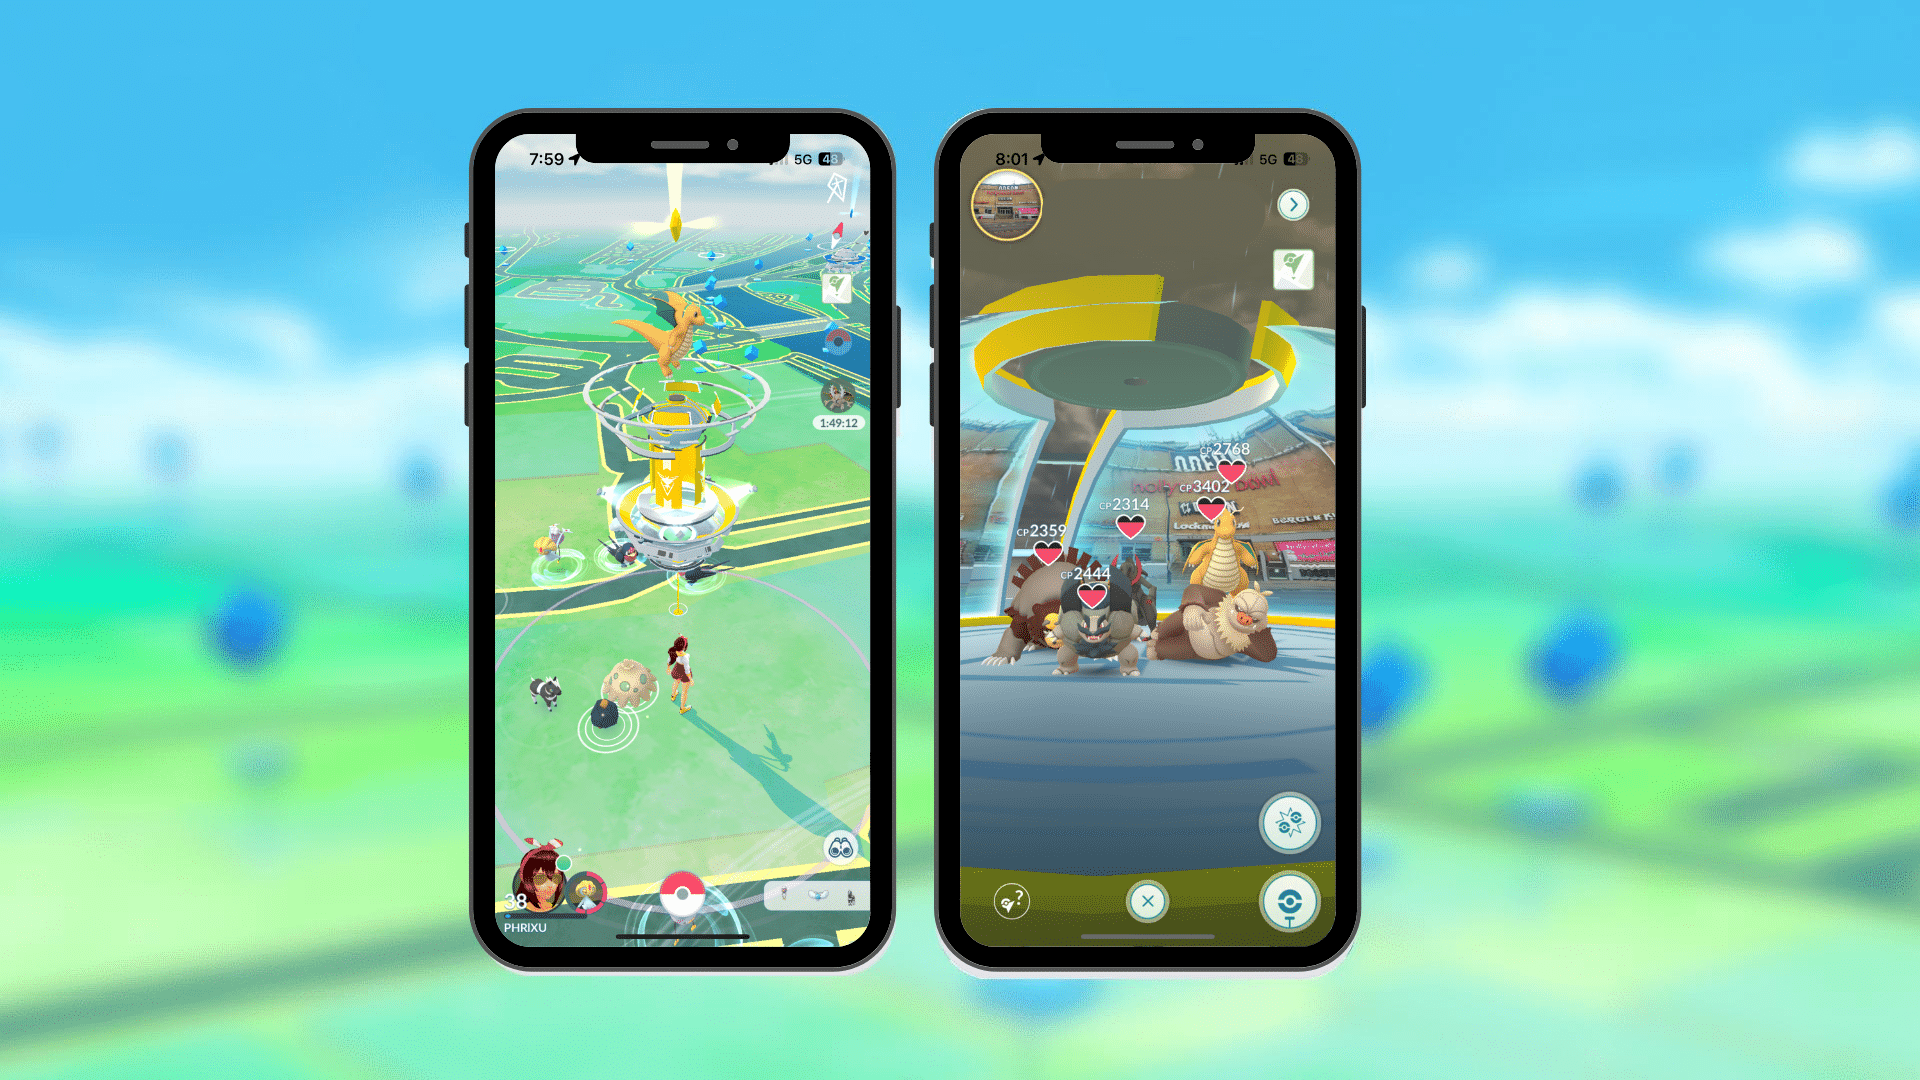 In-game screenshots showing an Instinct held Gym and the Pokémon defending it